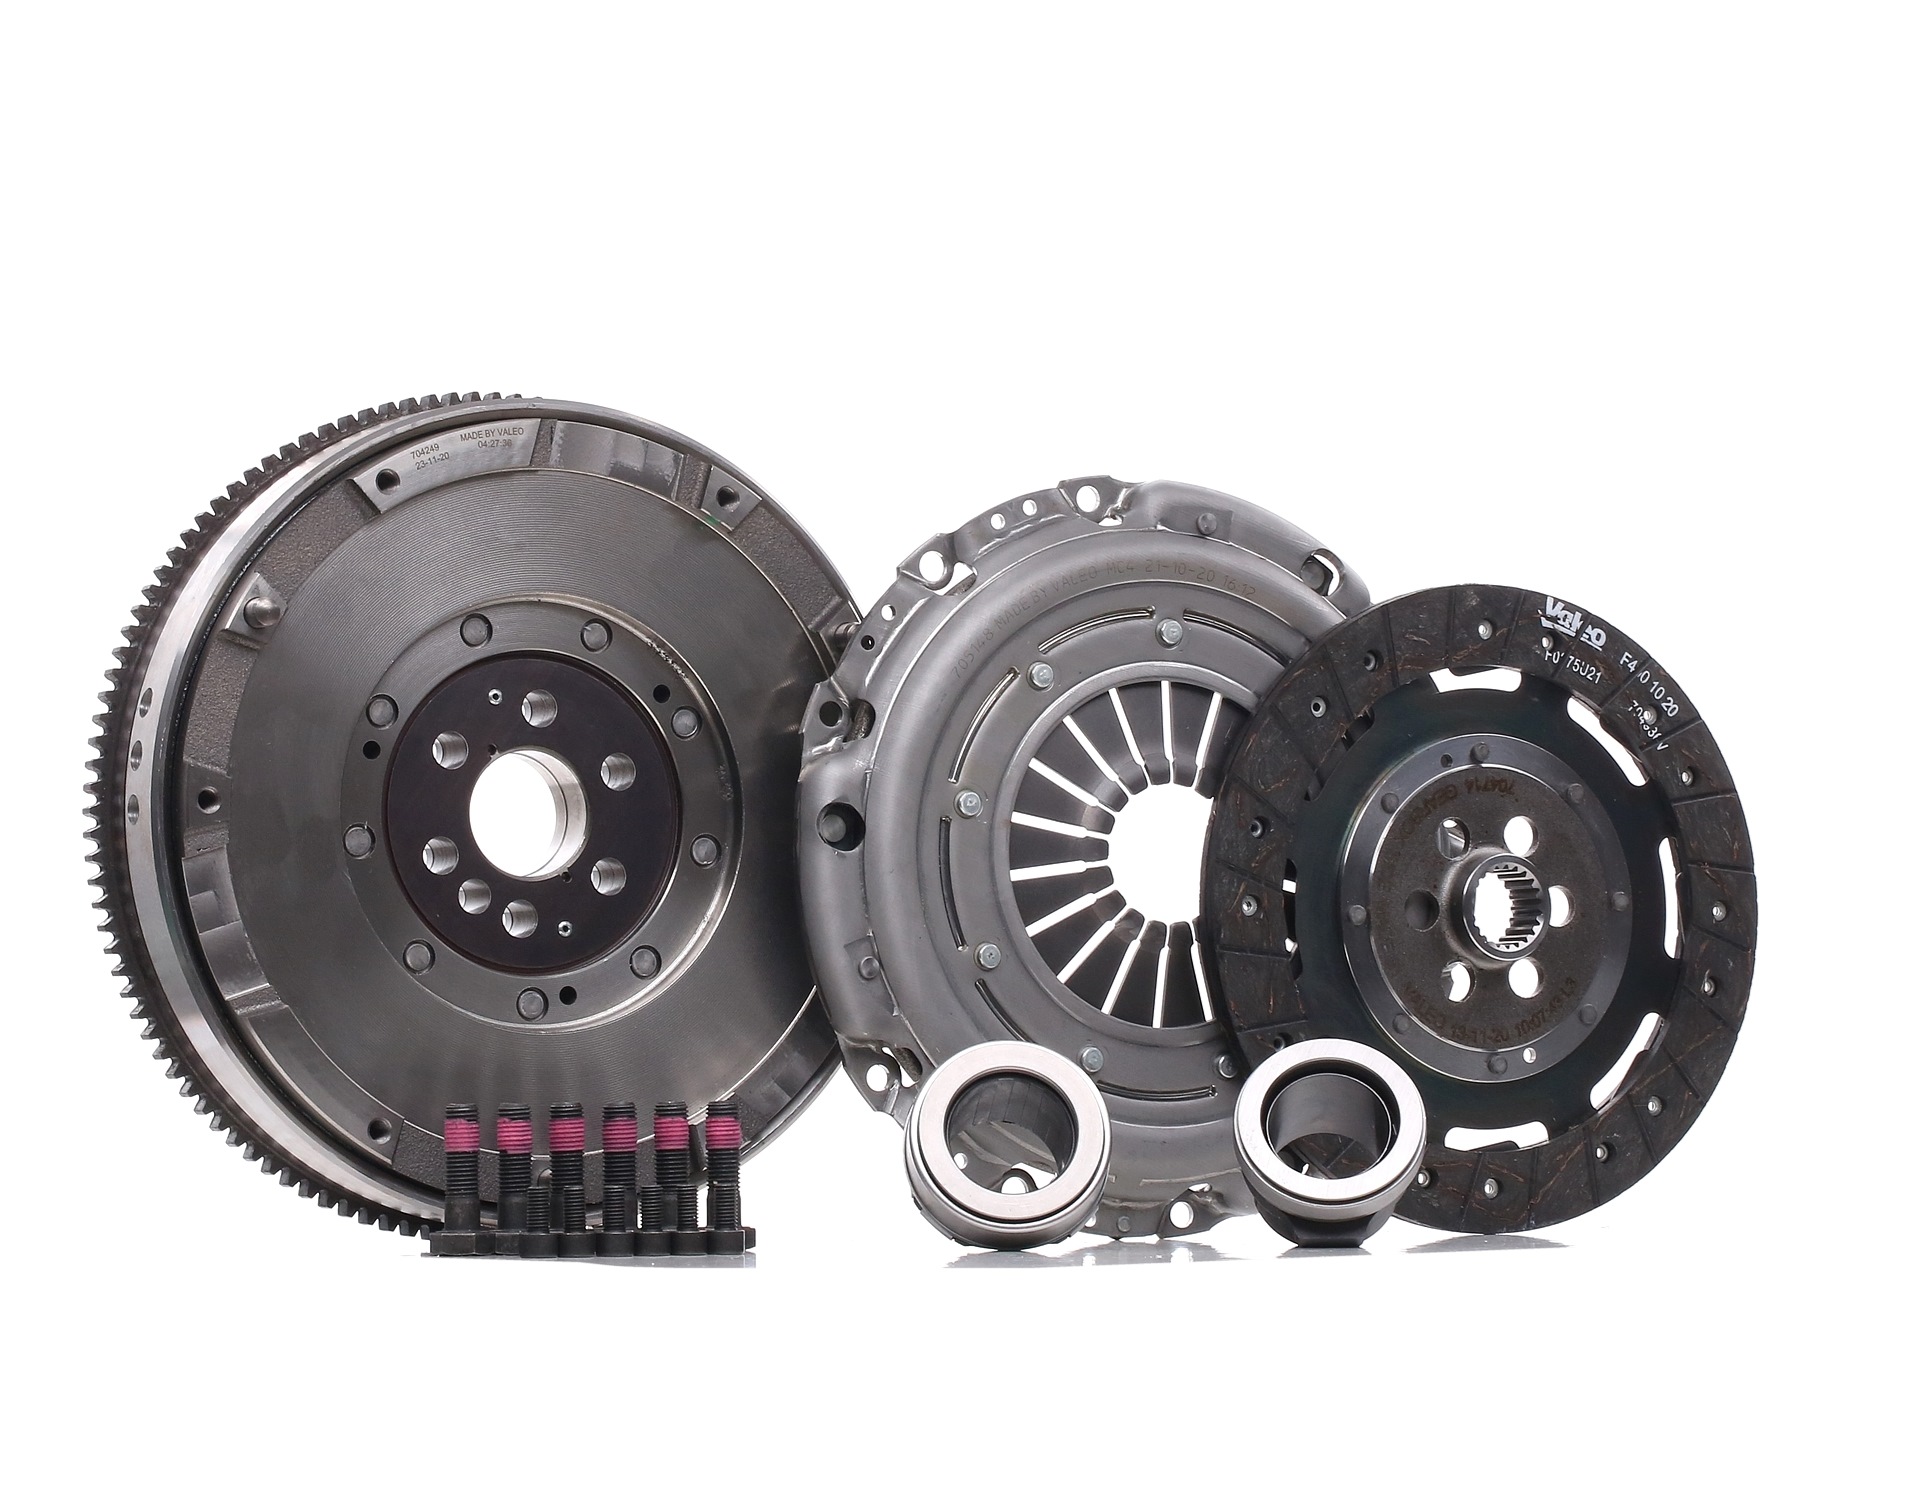 VALEO 837108 Clutch kit with dual-mass flywheel, with screw set, with clutch release bearing, 228mm